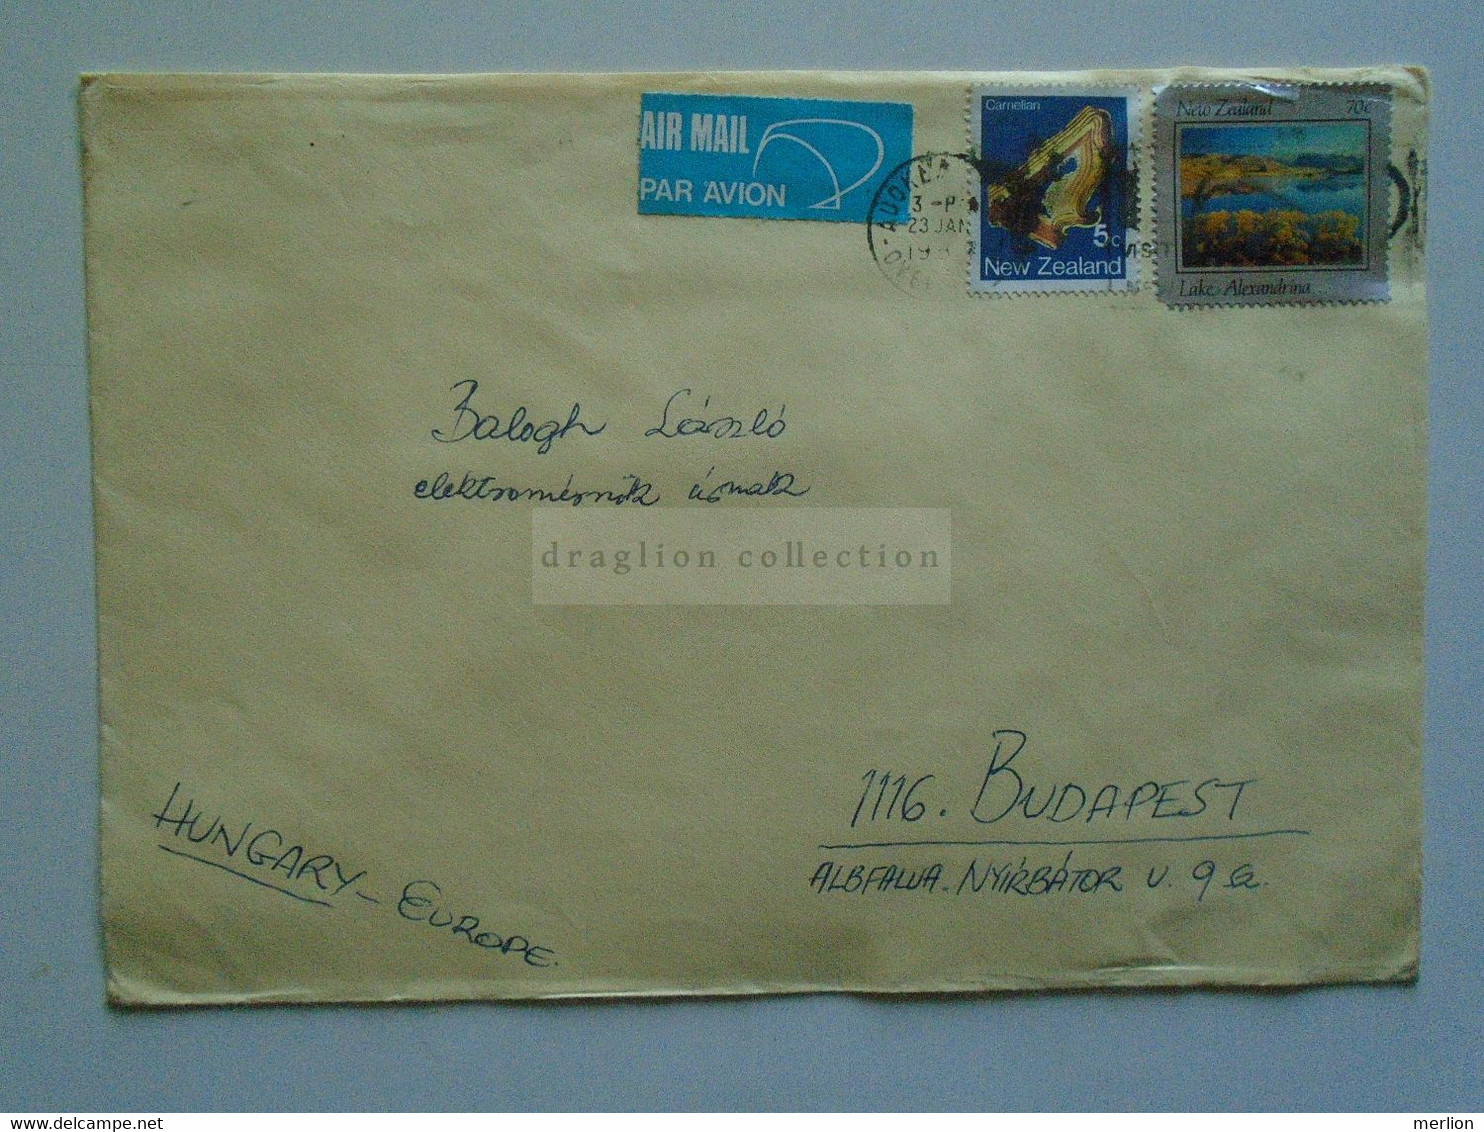 E0247 New Zealand  Airmail  Cover  - Cancel   Ca 1980  Titirangi  Auckland -stamp   Lake Alexandrina -   Sent To Hungary - Covers & Documents